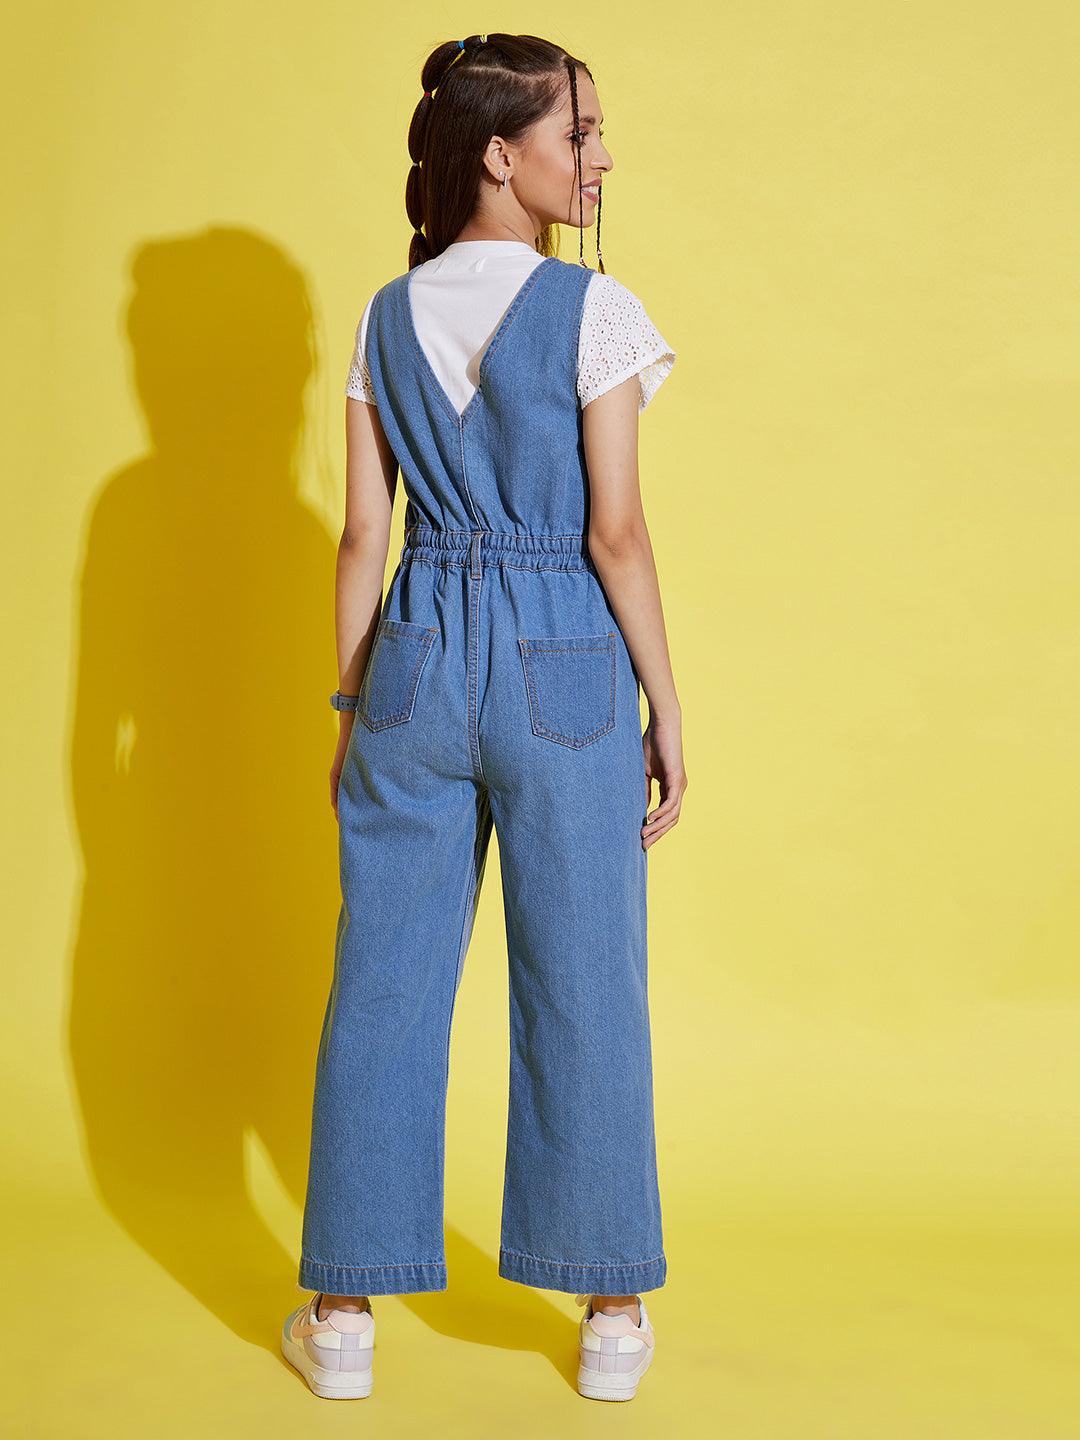 Wholesale Women Denim Jumpsuit Ladies Jeans Rompers Female Casual Overall  Playsuit With Pocket From malibabacom